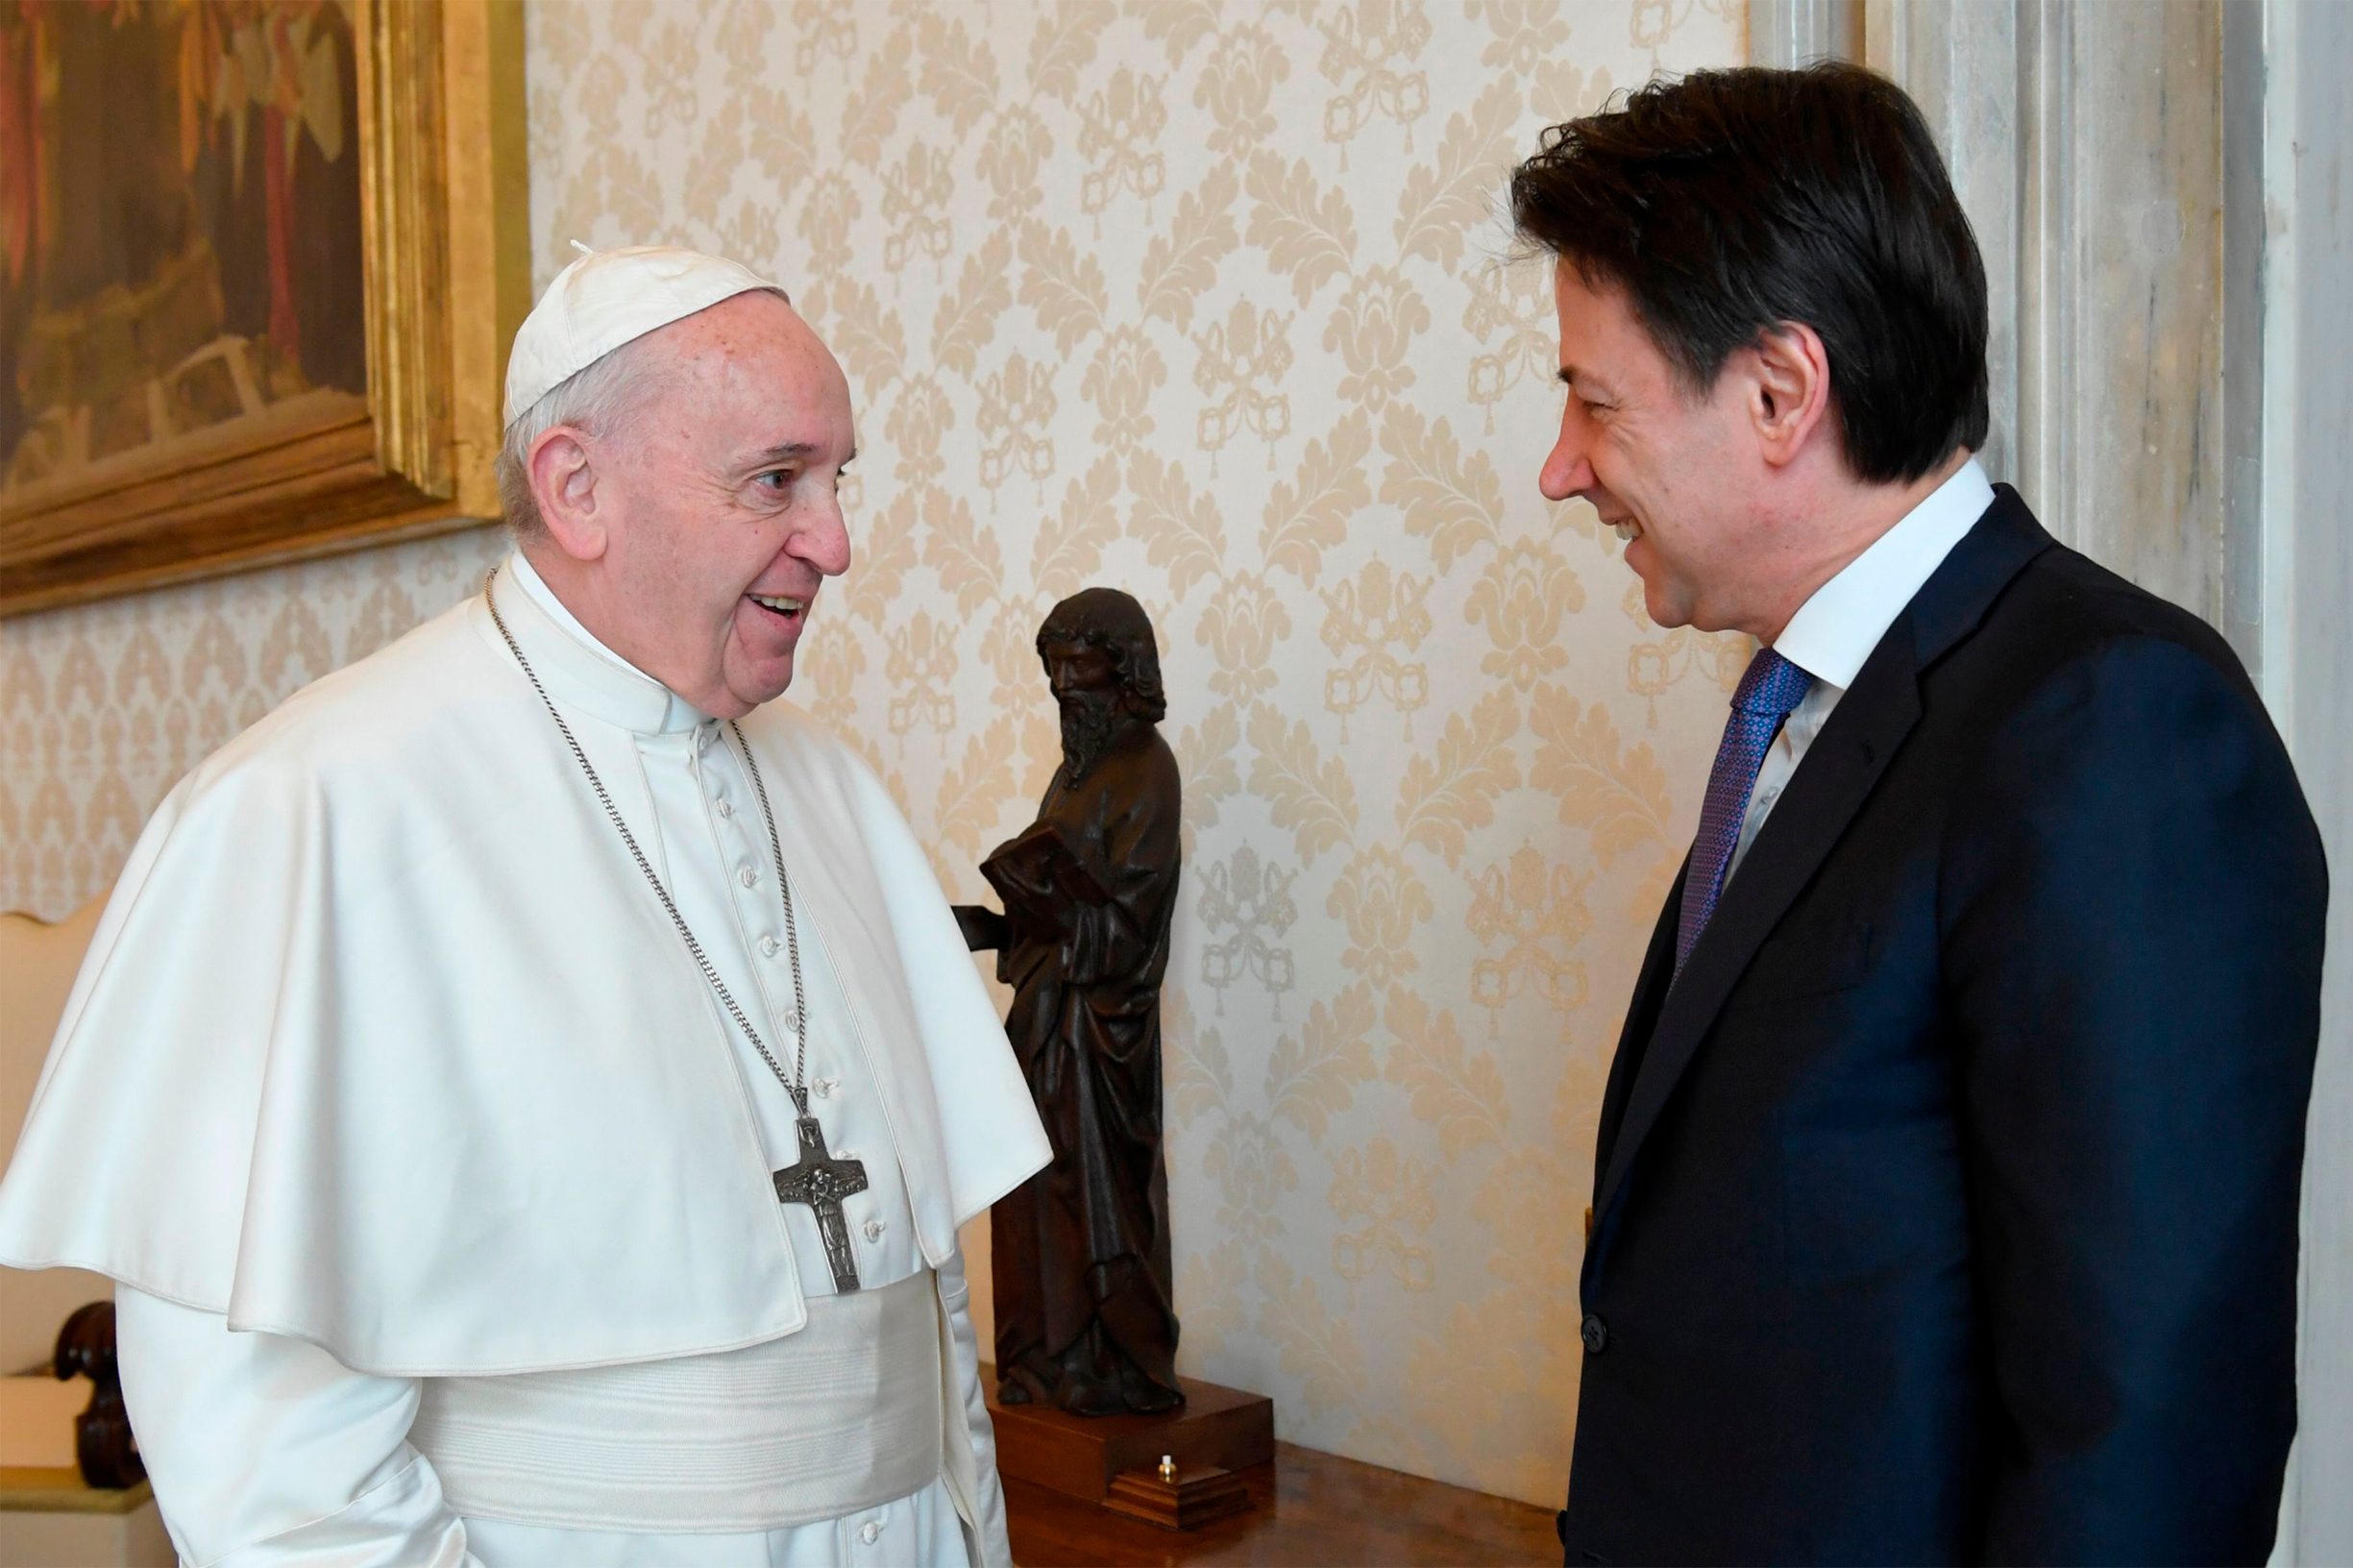 This photo taken and handout on March 30, 2020 by the Vatican Media shows Pope Francis (L) meeting with Italy's Prime Minister Giuseppe Conte in The Vatican, during the lockdown aimed at curbing the spread of the COVID-19 infection, caused by the novel coronavirus. (Photo by Handout / VATICAN MEDIA / AFP) / RESTRICTED TO EDITORIAL USE - MANDATORY CREDIT 